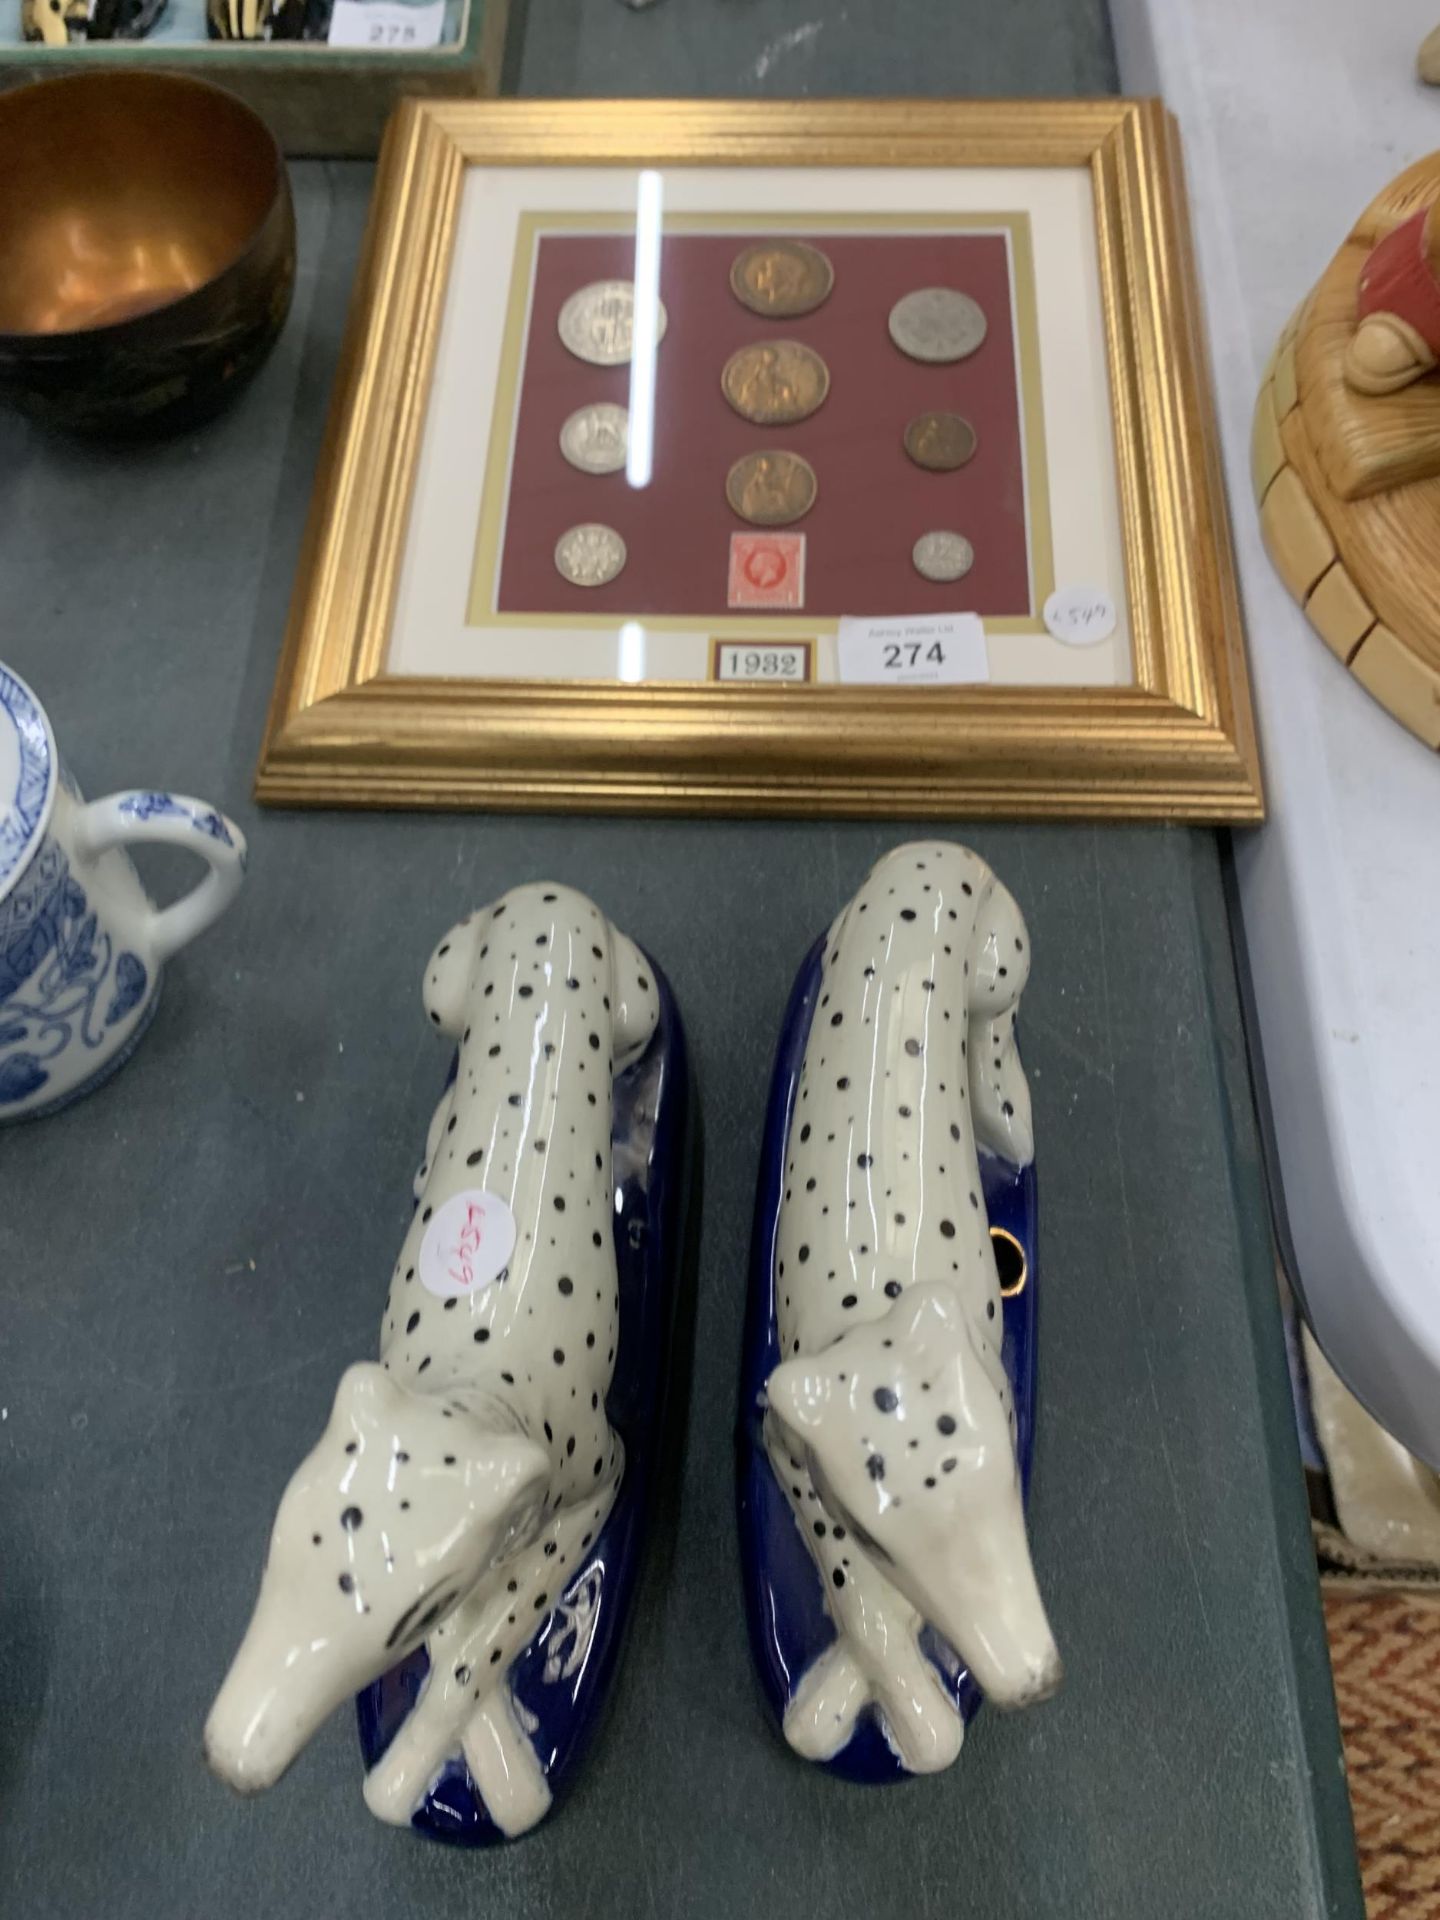 A PAIR OF STAFFORDSHIRE DALMATIONS AND A FRAIMED 1982 COIN SET